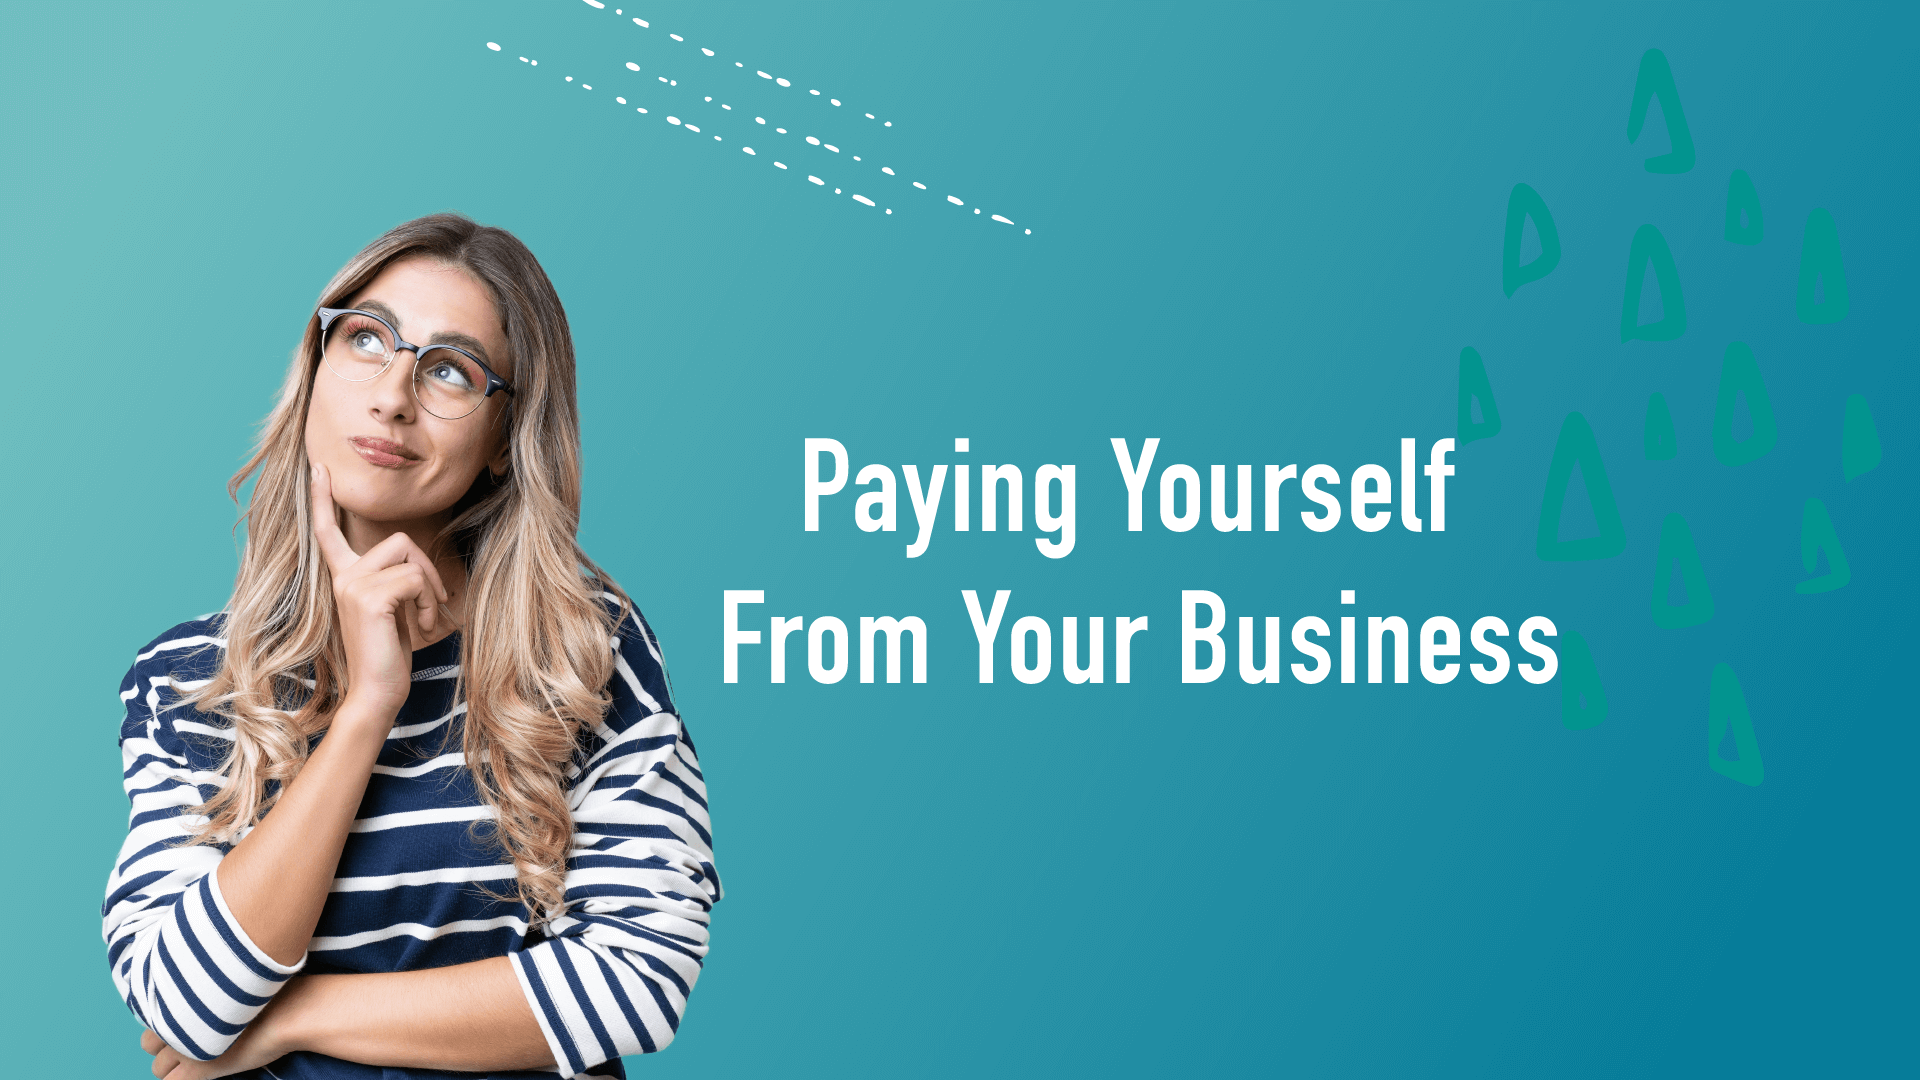 Paying Yourself From Your Business